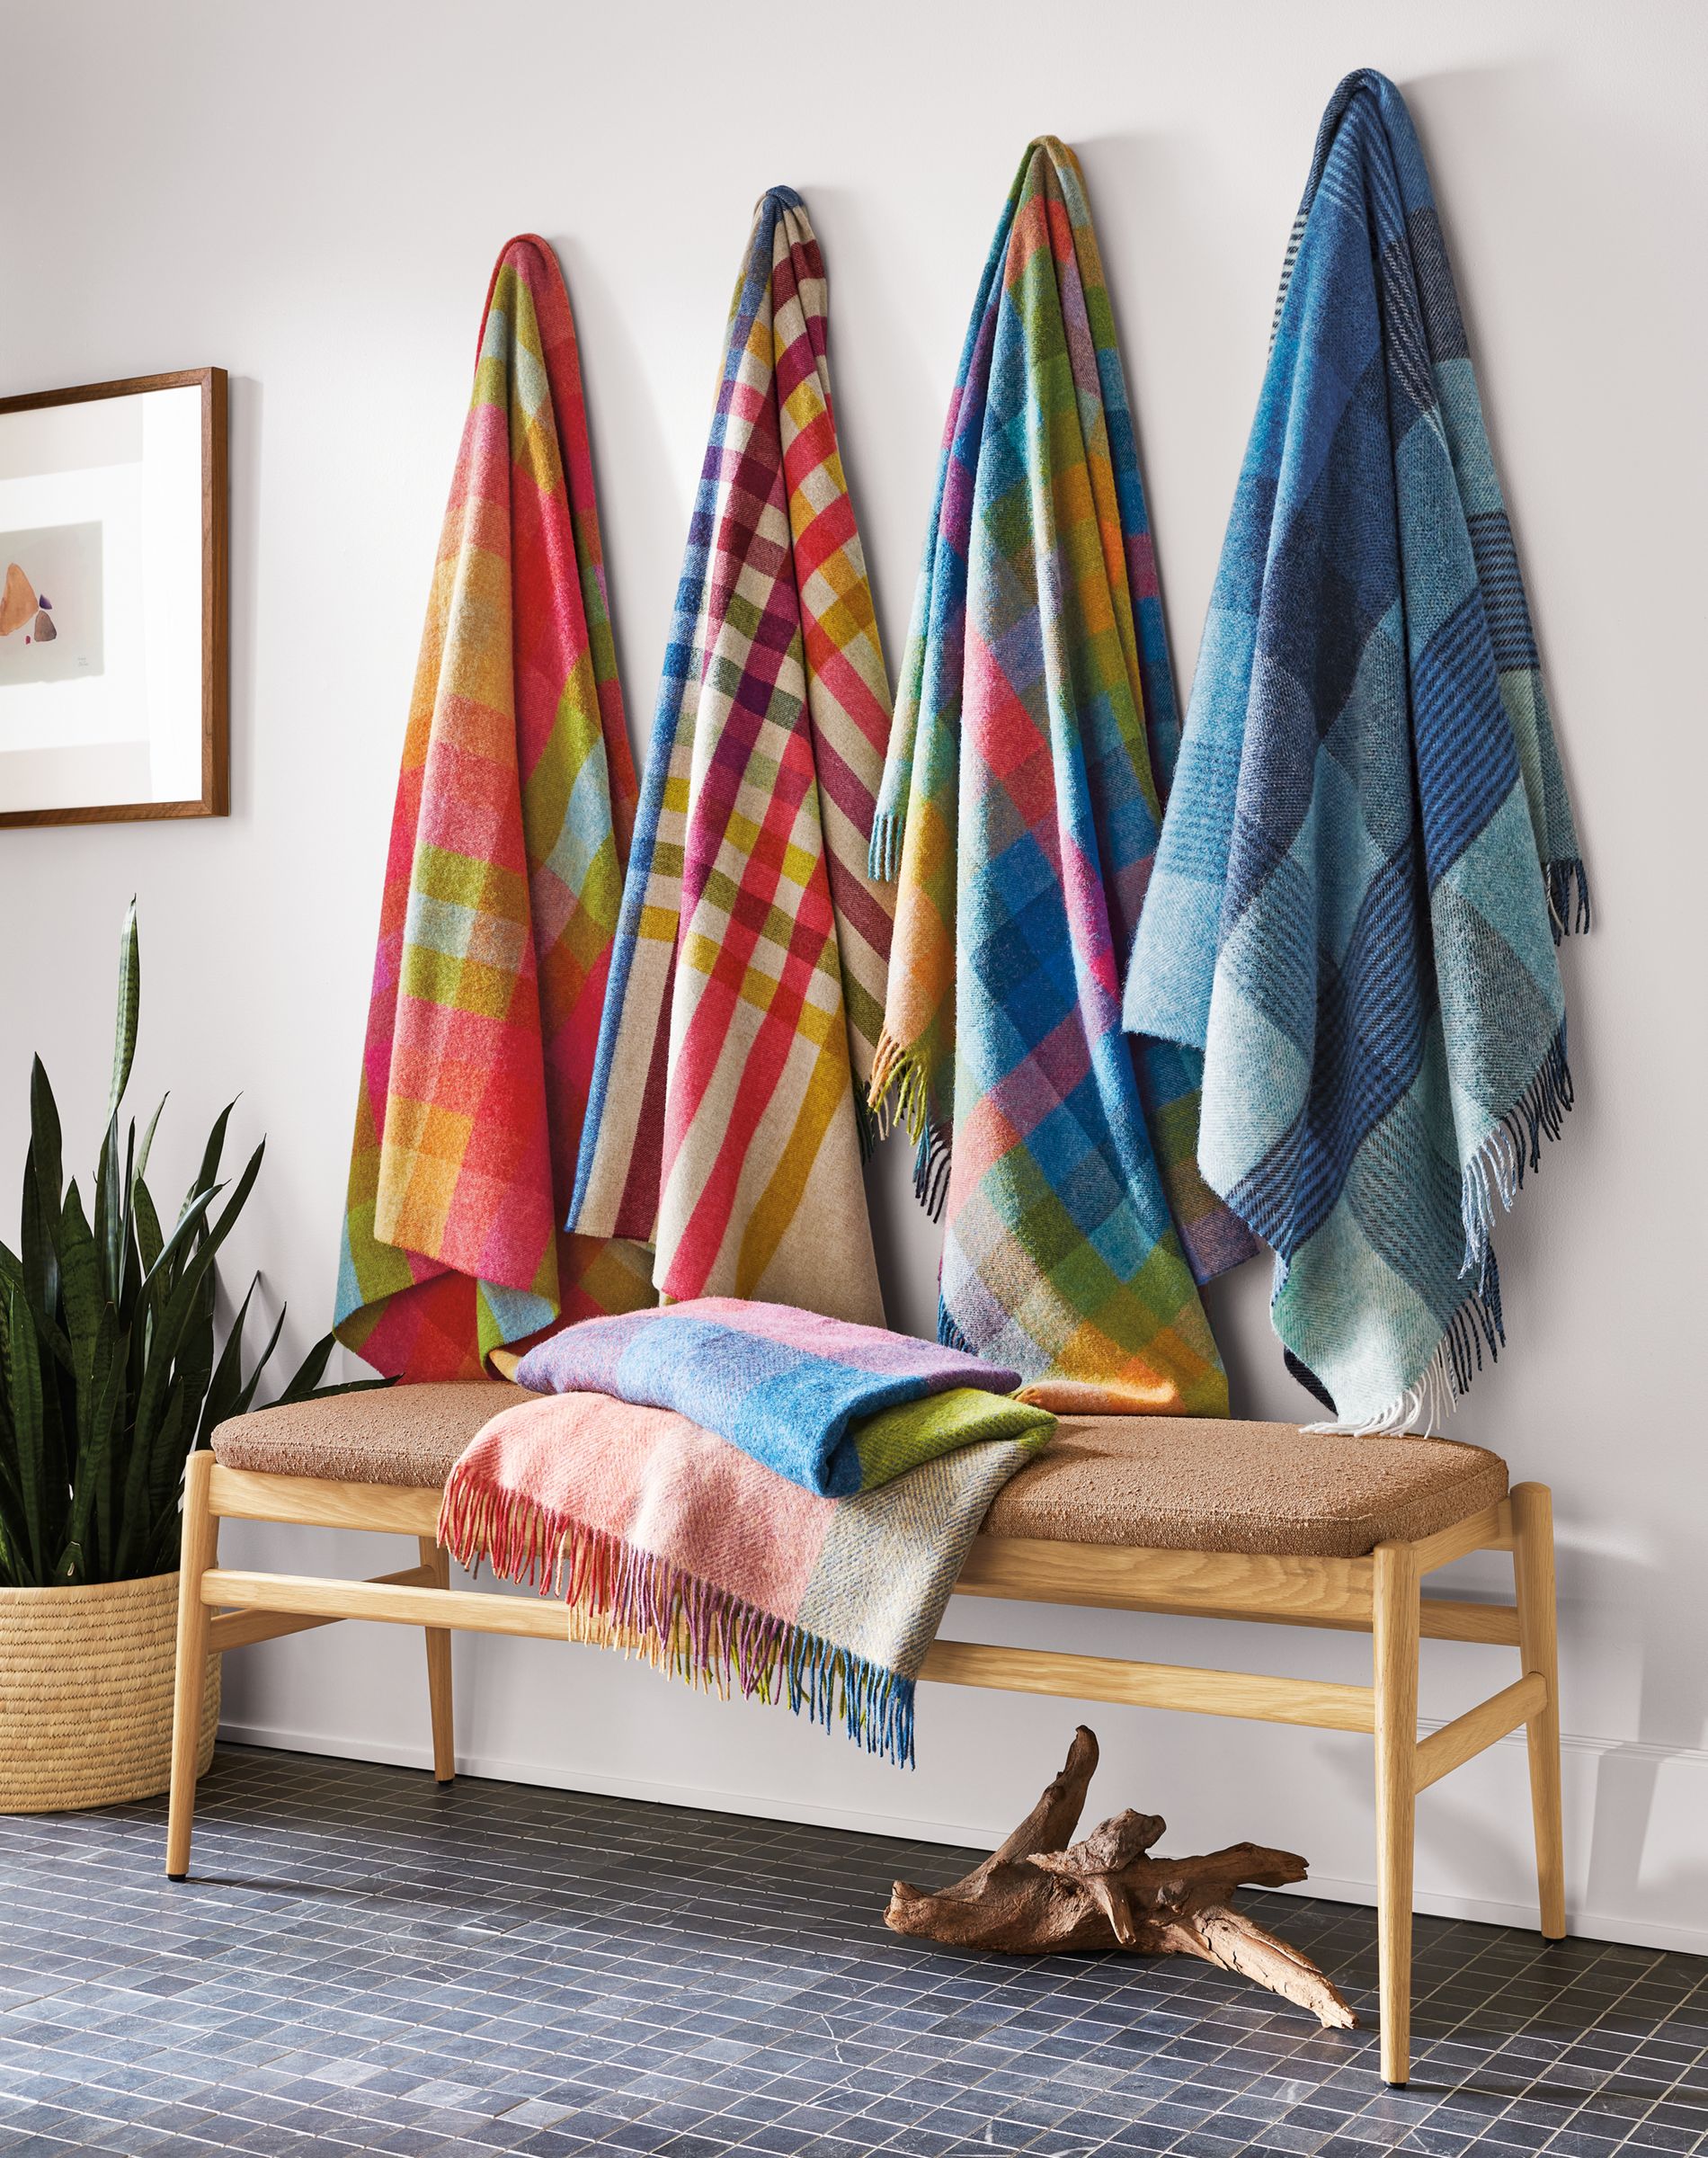 colorful throw blankets hung on hooks in entryway.